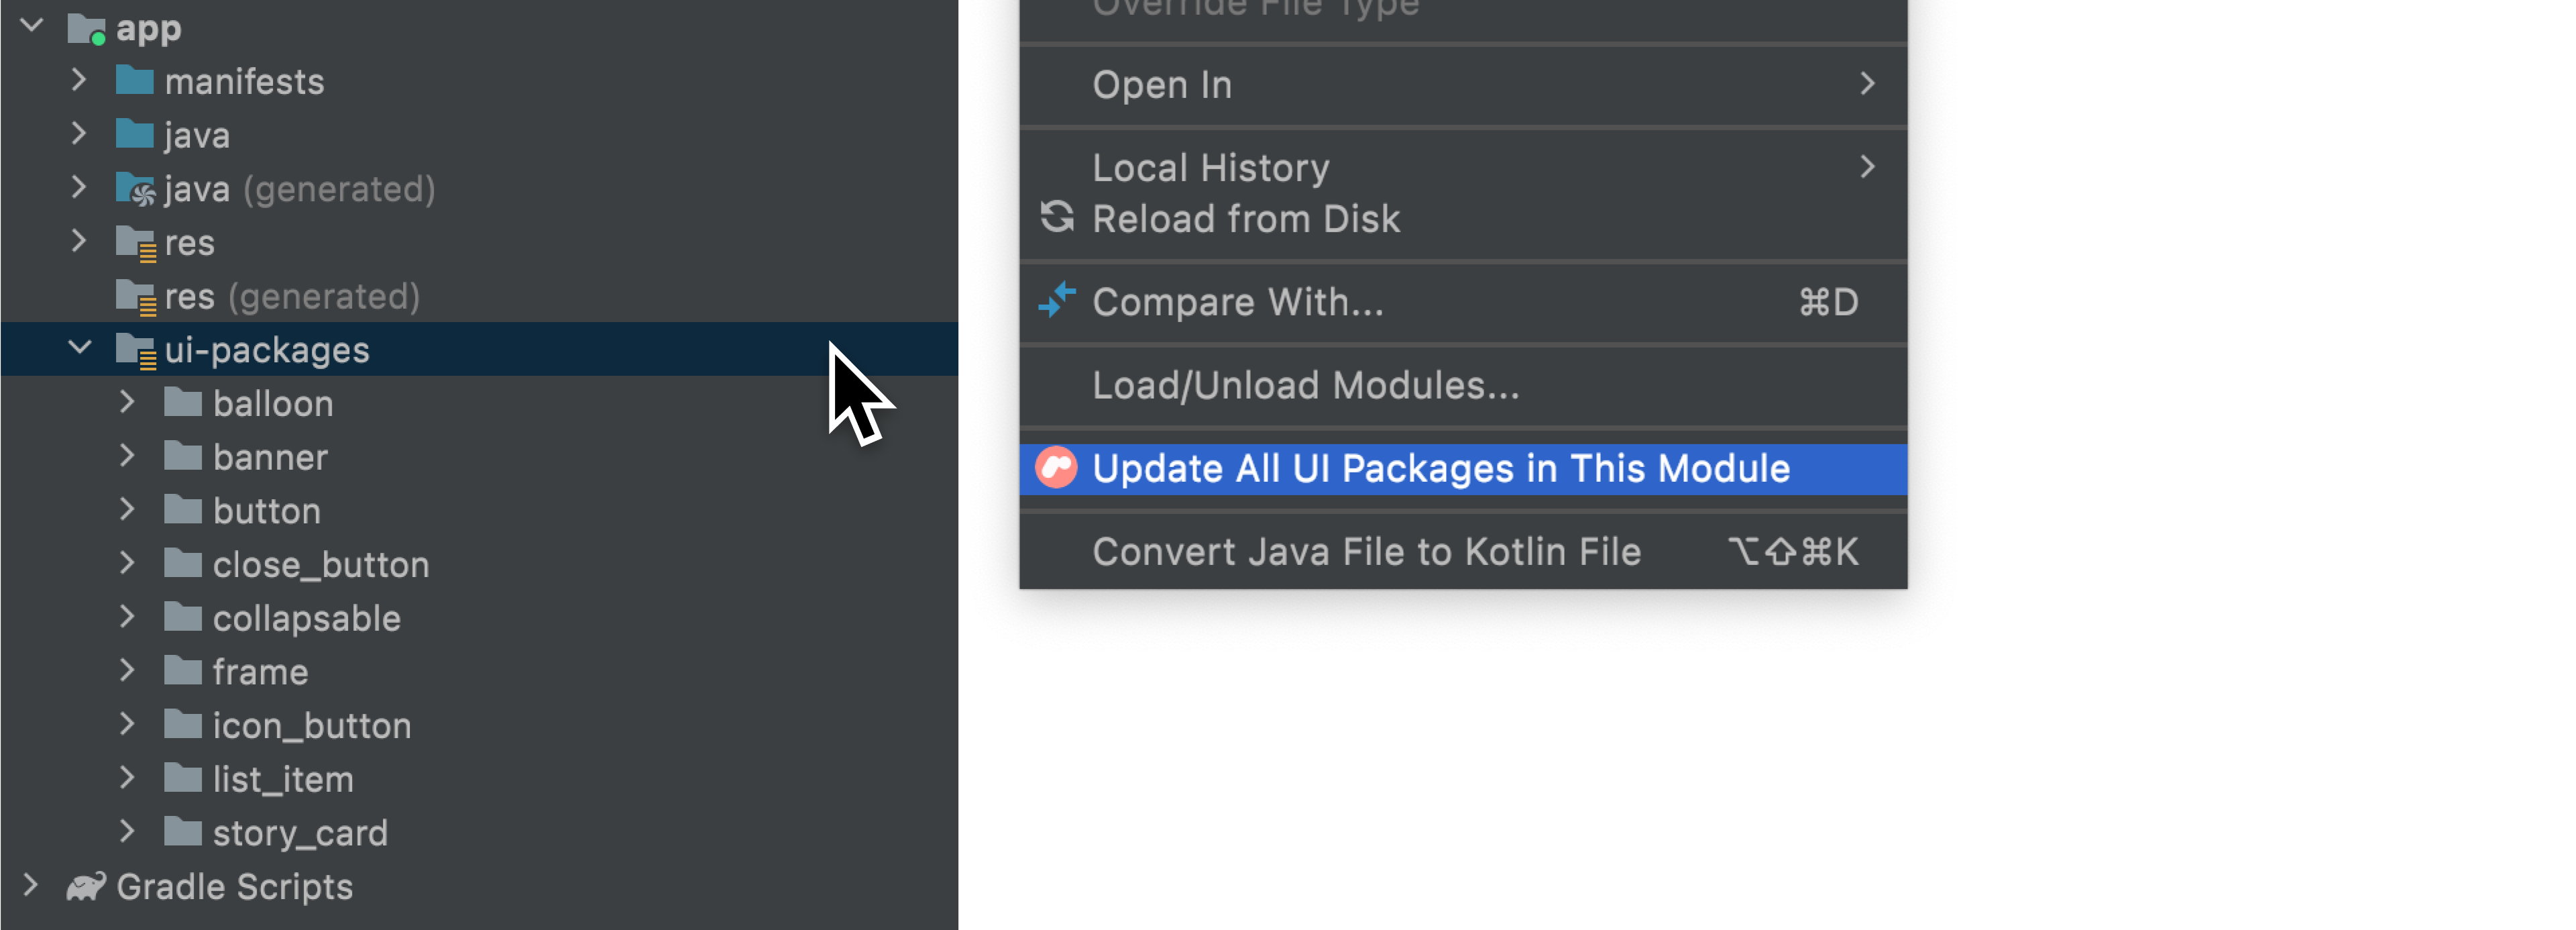 Update All UI Packages option in the context menu